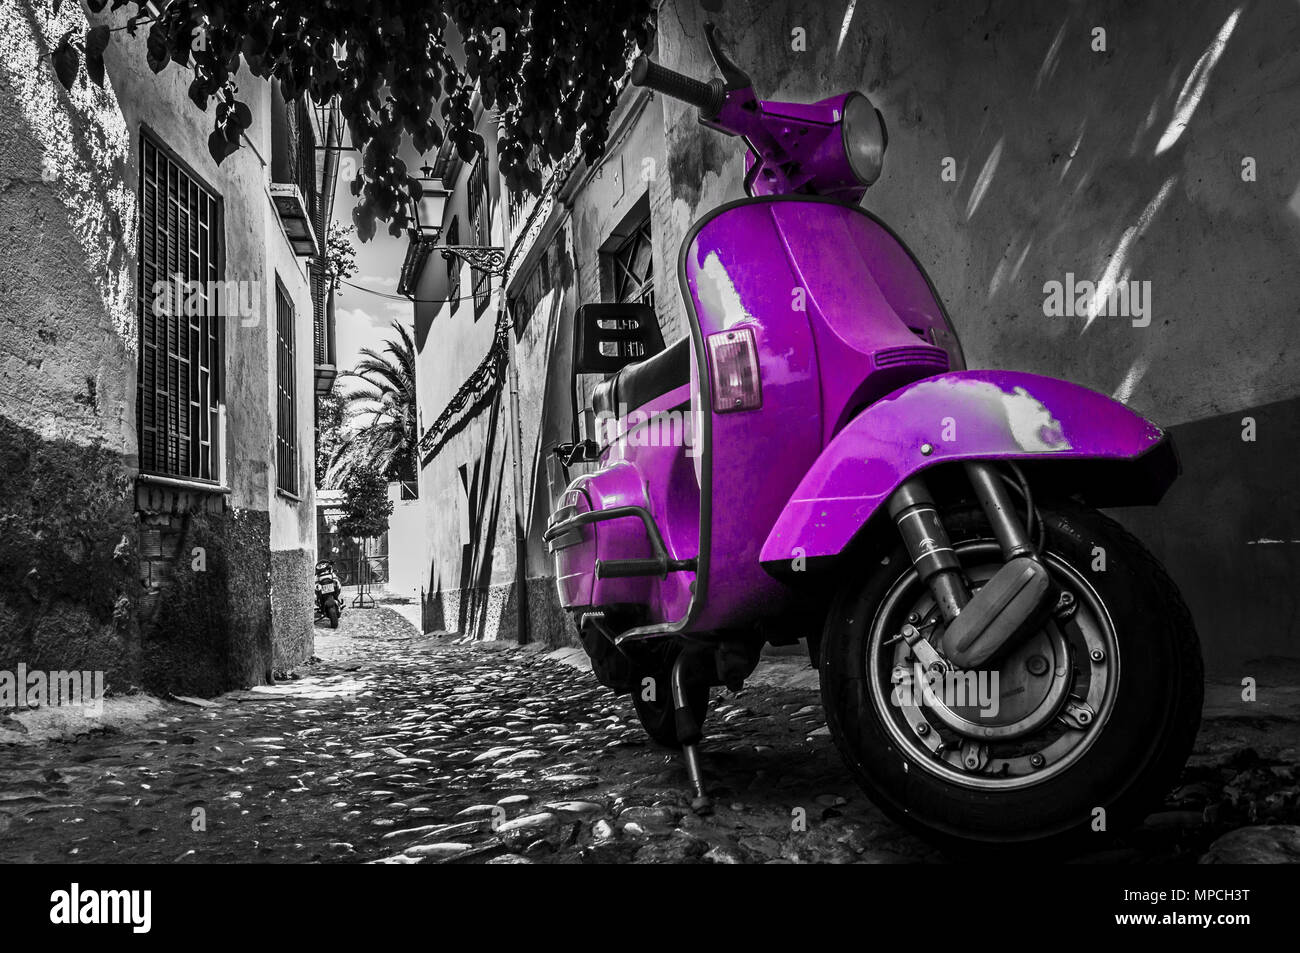 Purple vespa scooter parked in an old empty paved street in Italy Stock  Photo - Alamy